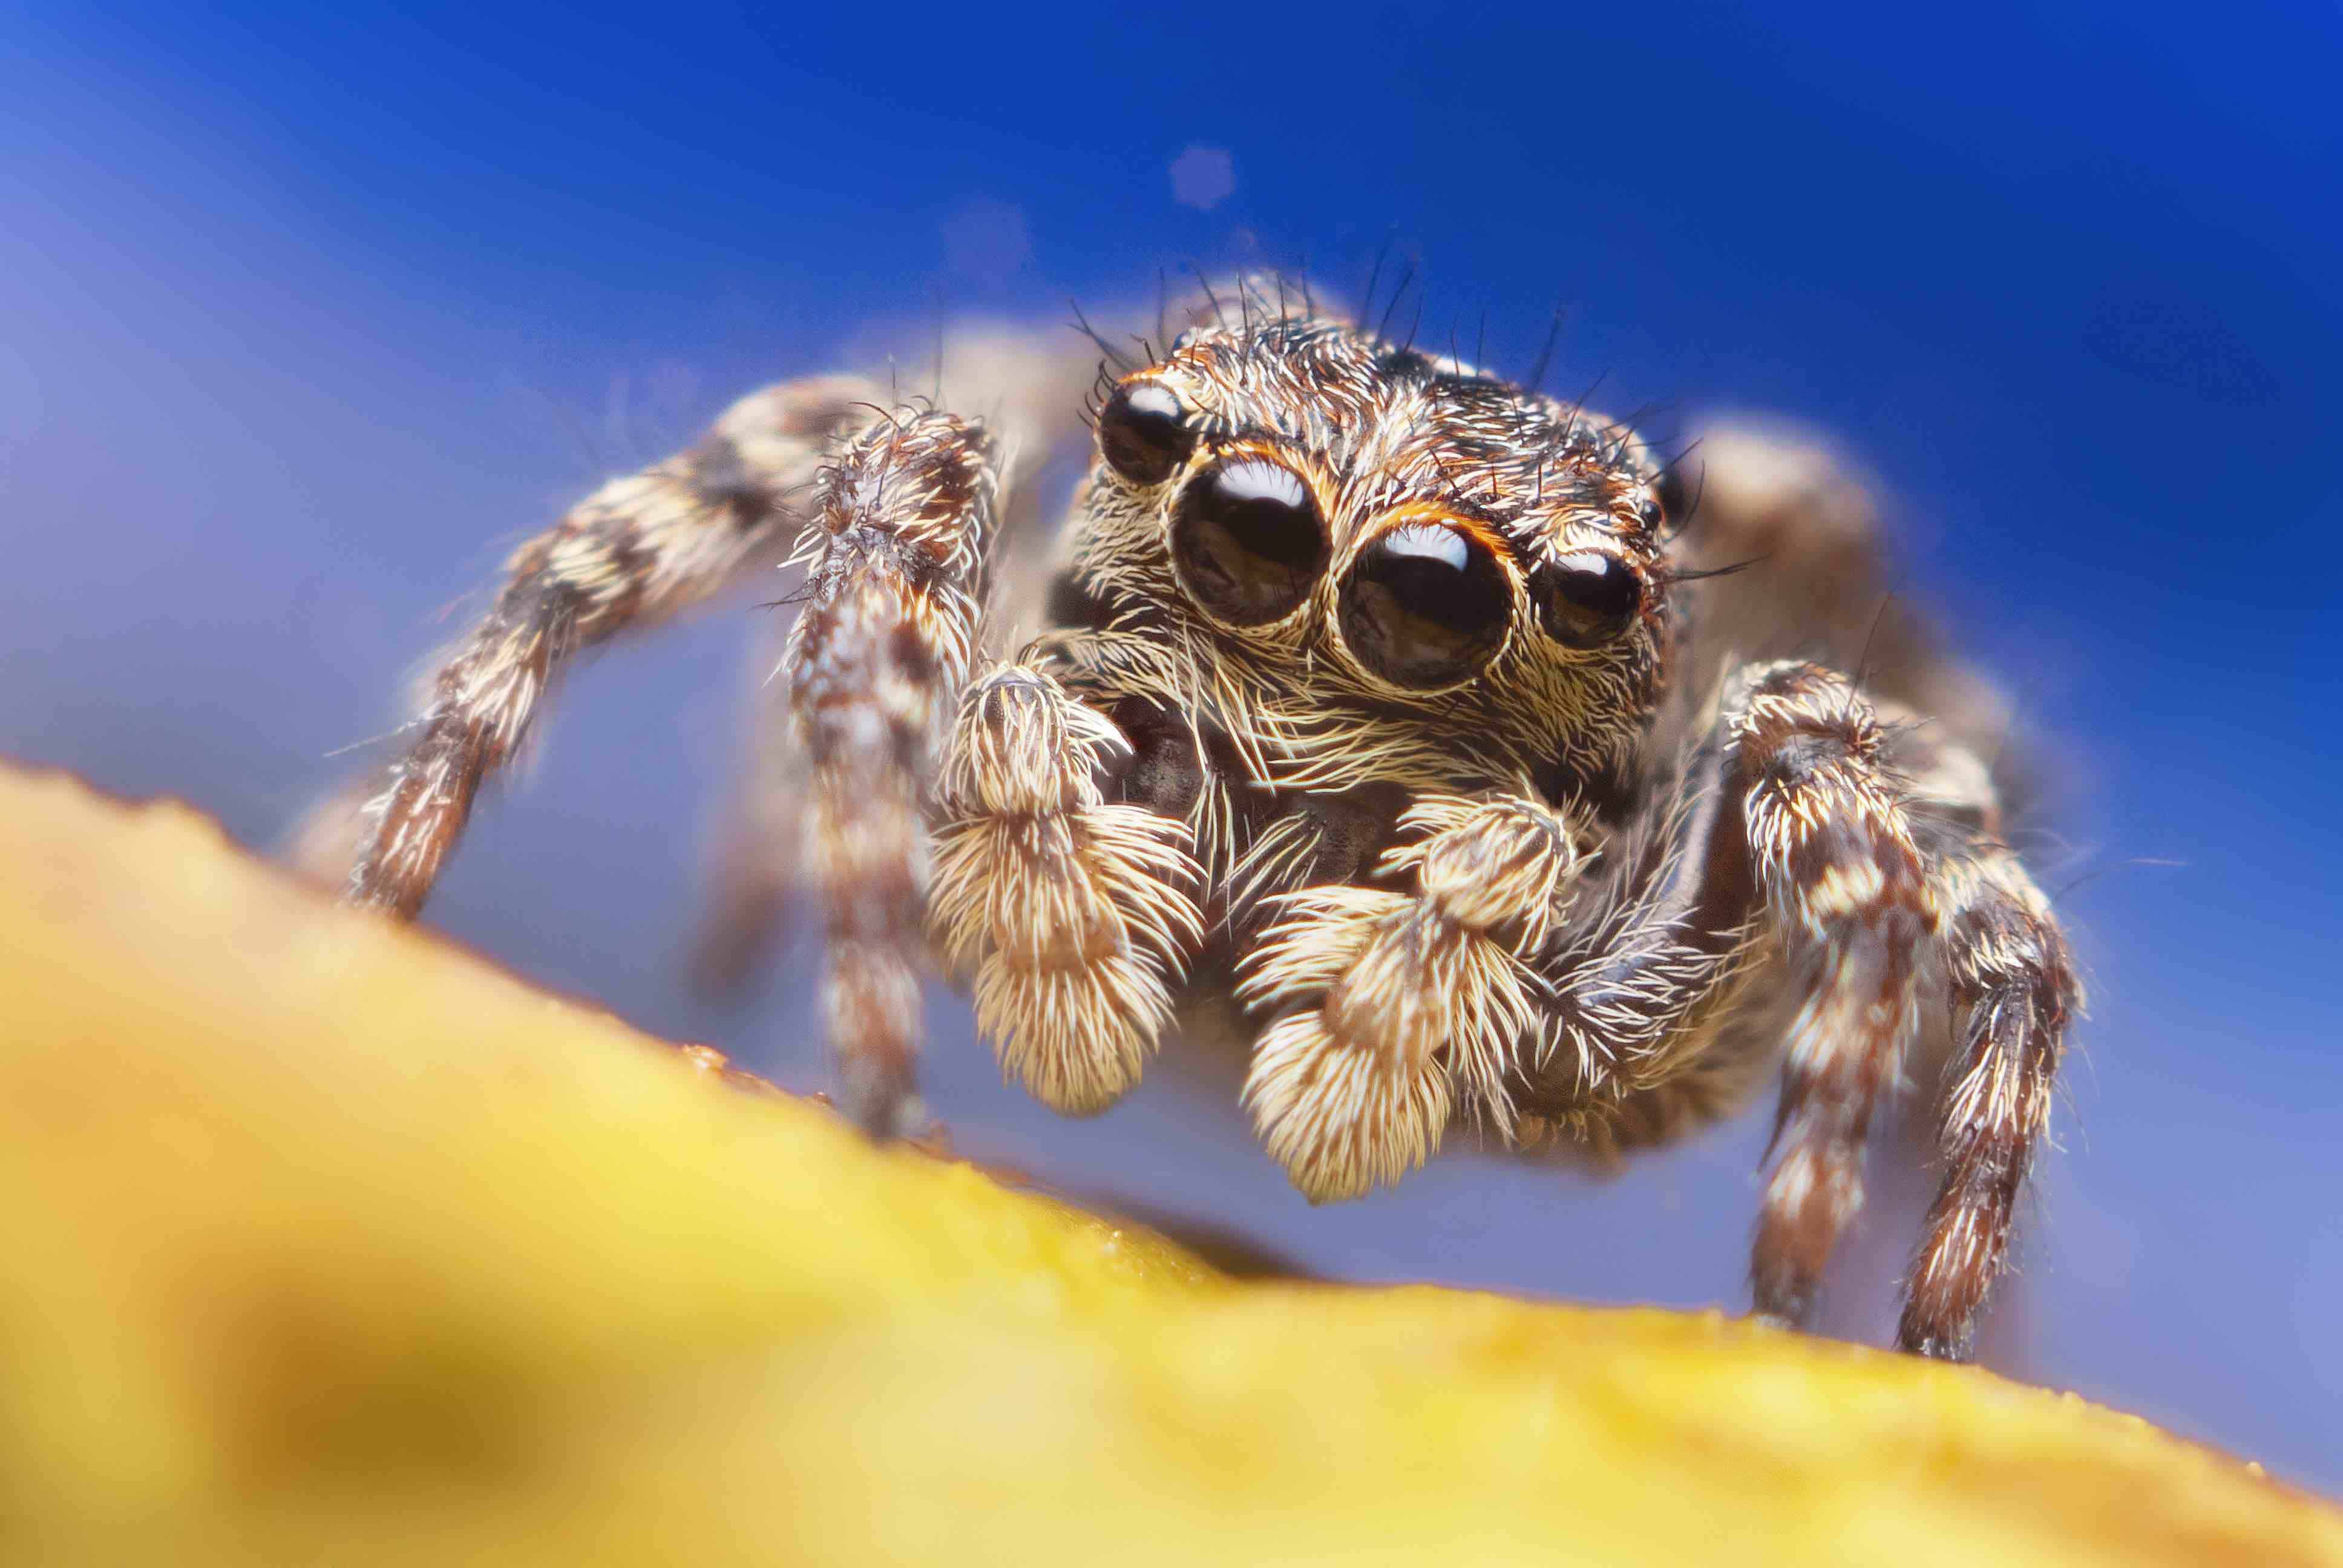 Spiders of Unusual Size are closer than (and maybe not who) you think, Lifestyle